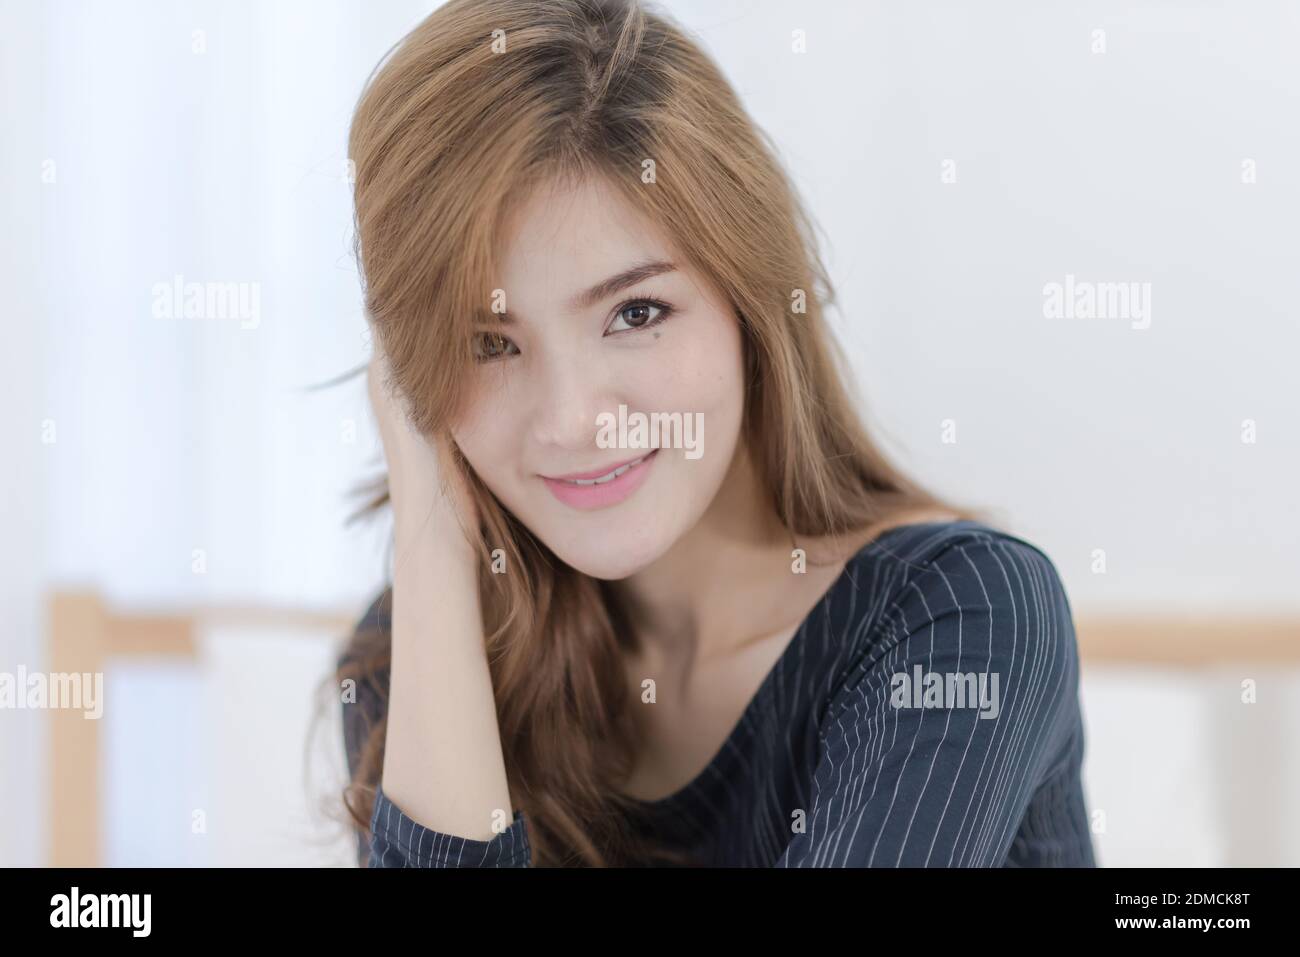 Close-up Portrait Of Smiling Young Woman At Home Stock Photo